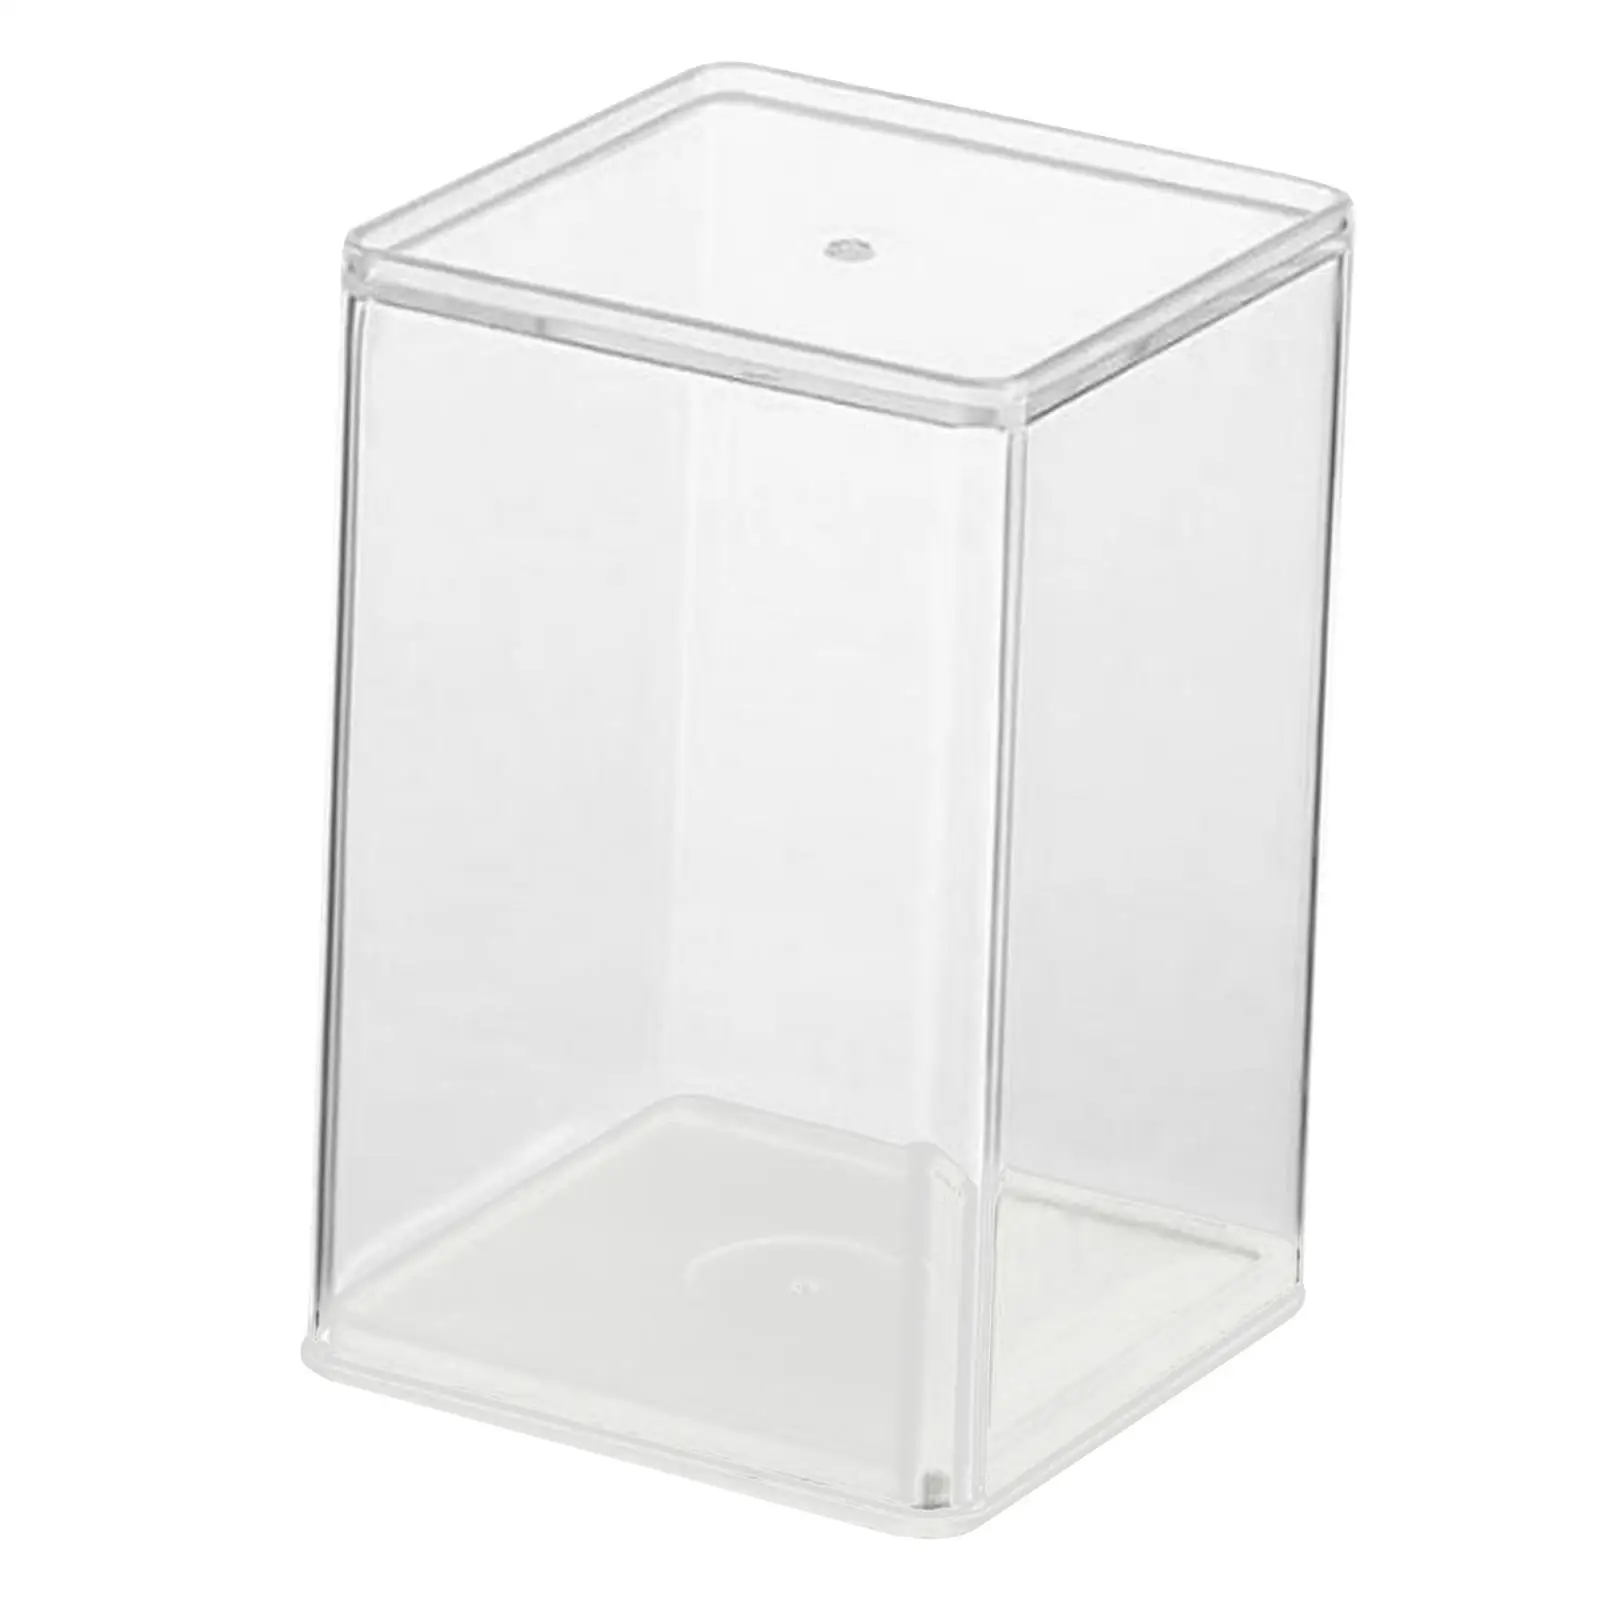 Transparent Acrylic Case Display Box Shelves Free Standing Stand Protection Dust Cabinet for Toys Collectibles Adult Kids